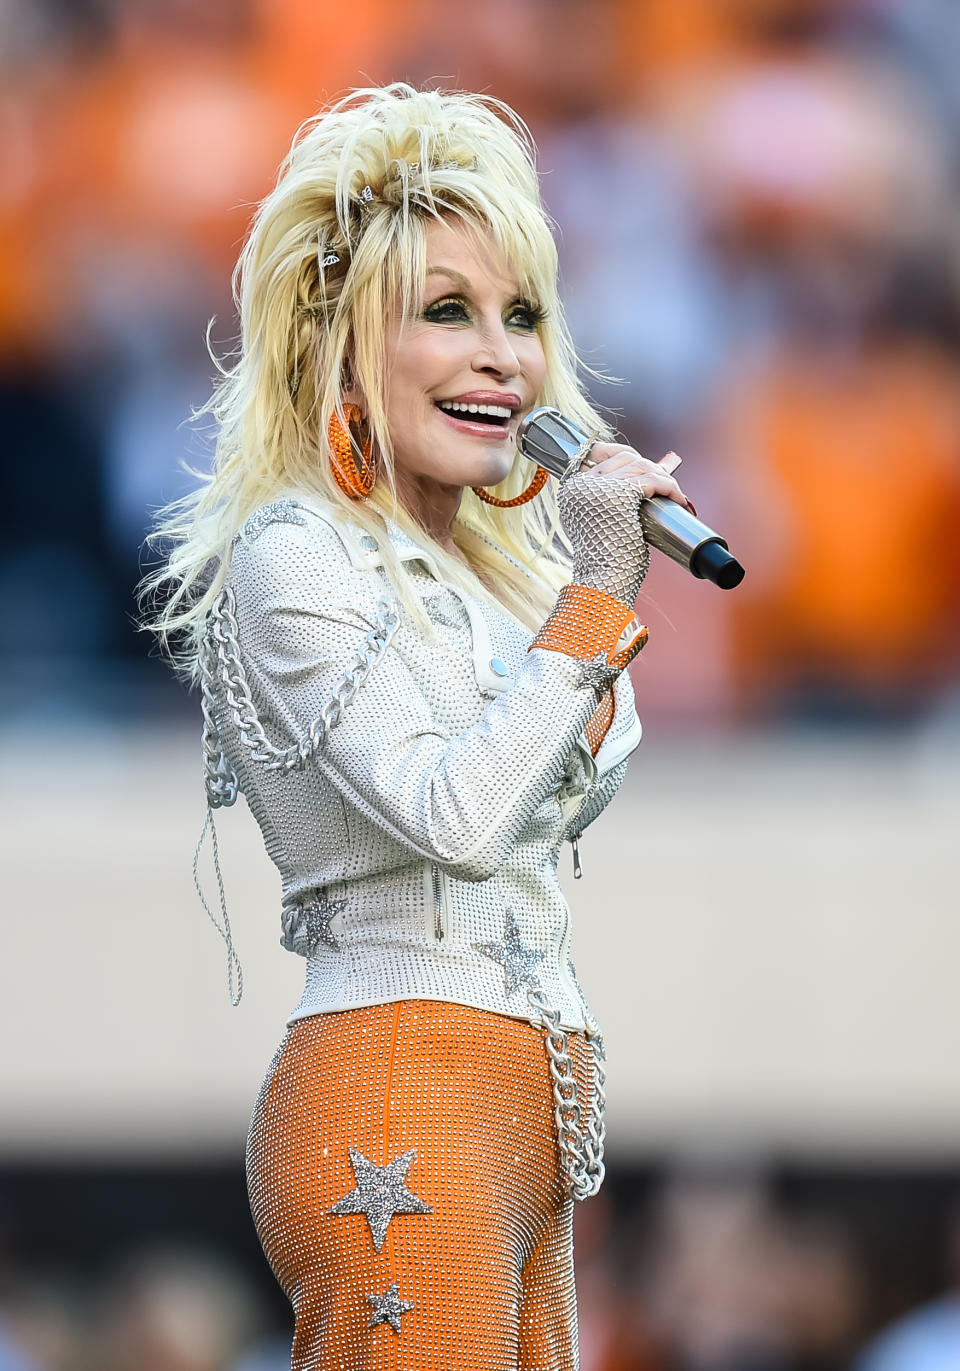 Dolly Parton sings onstage, wearing a bedazzled outfit with star motifs